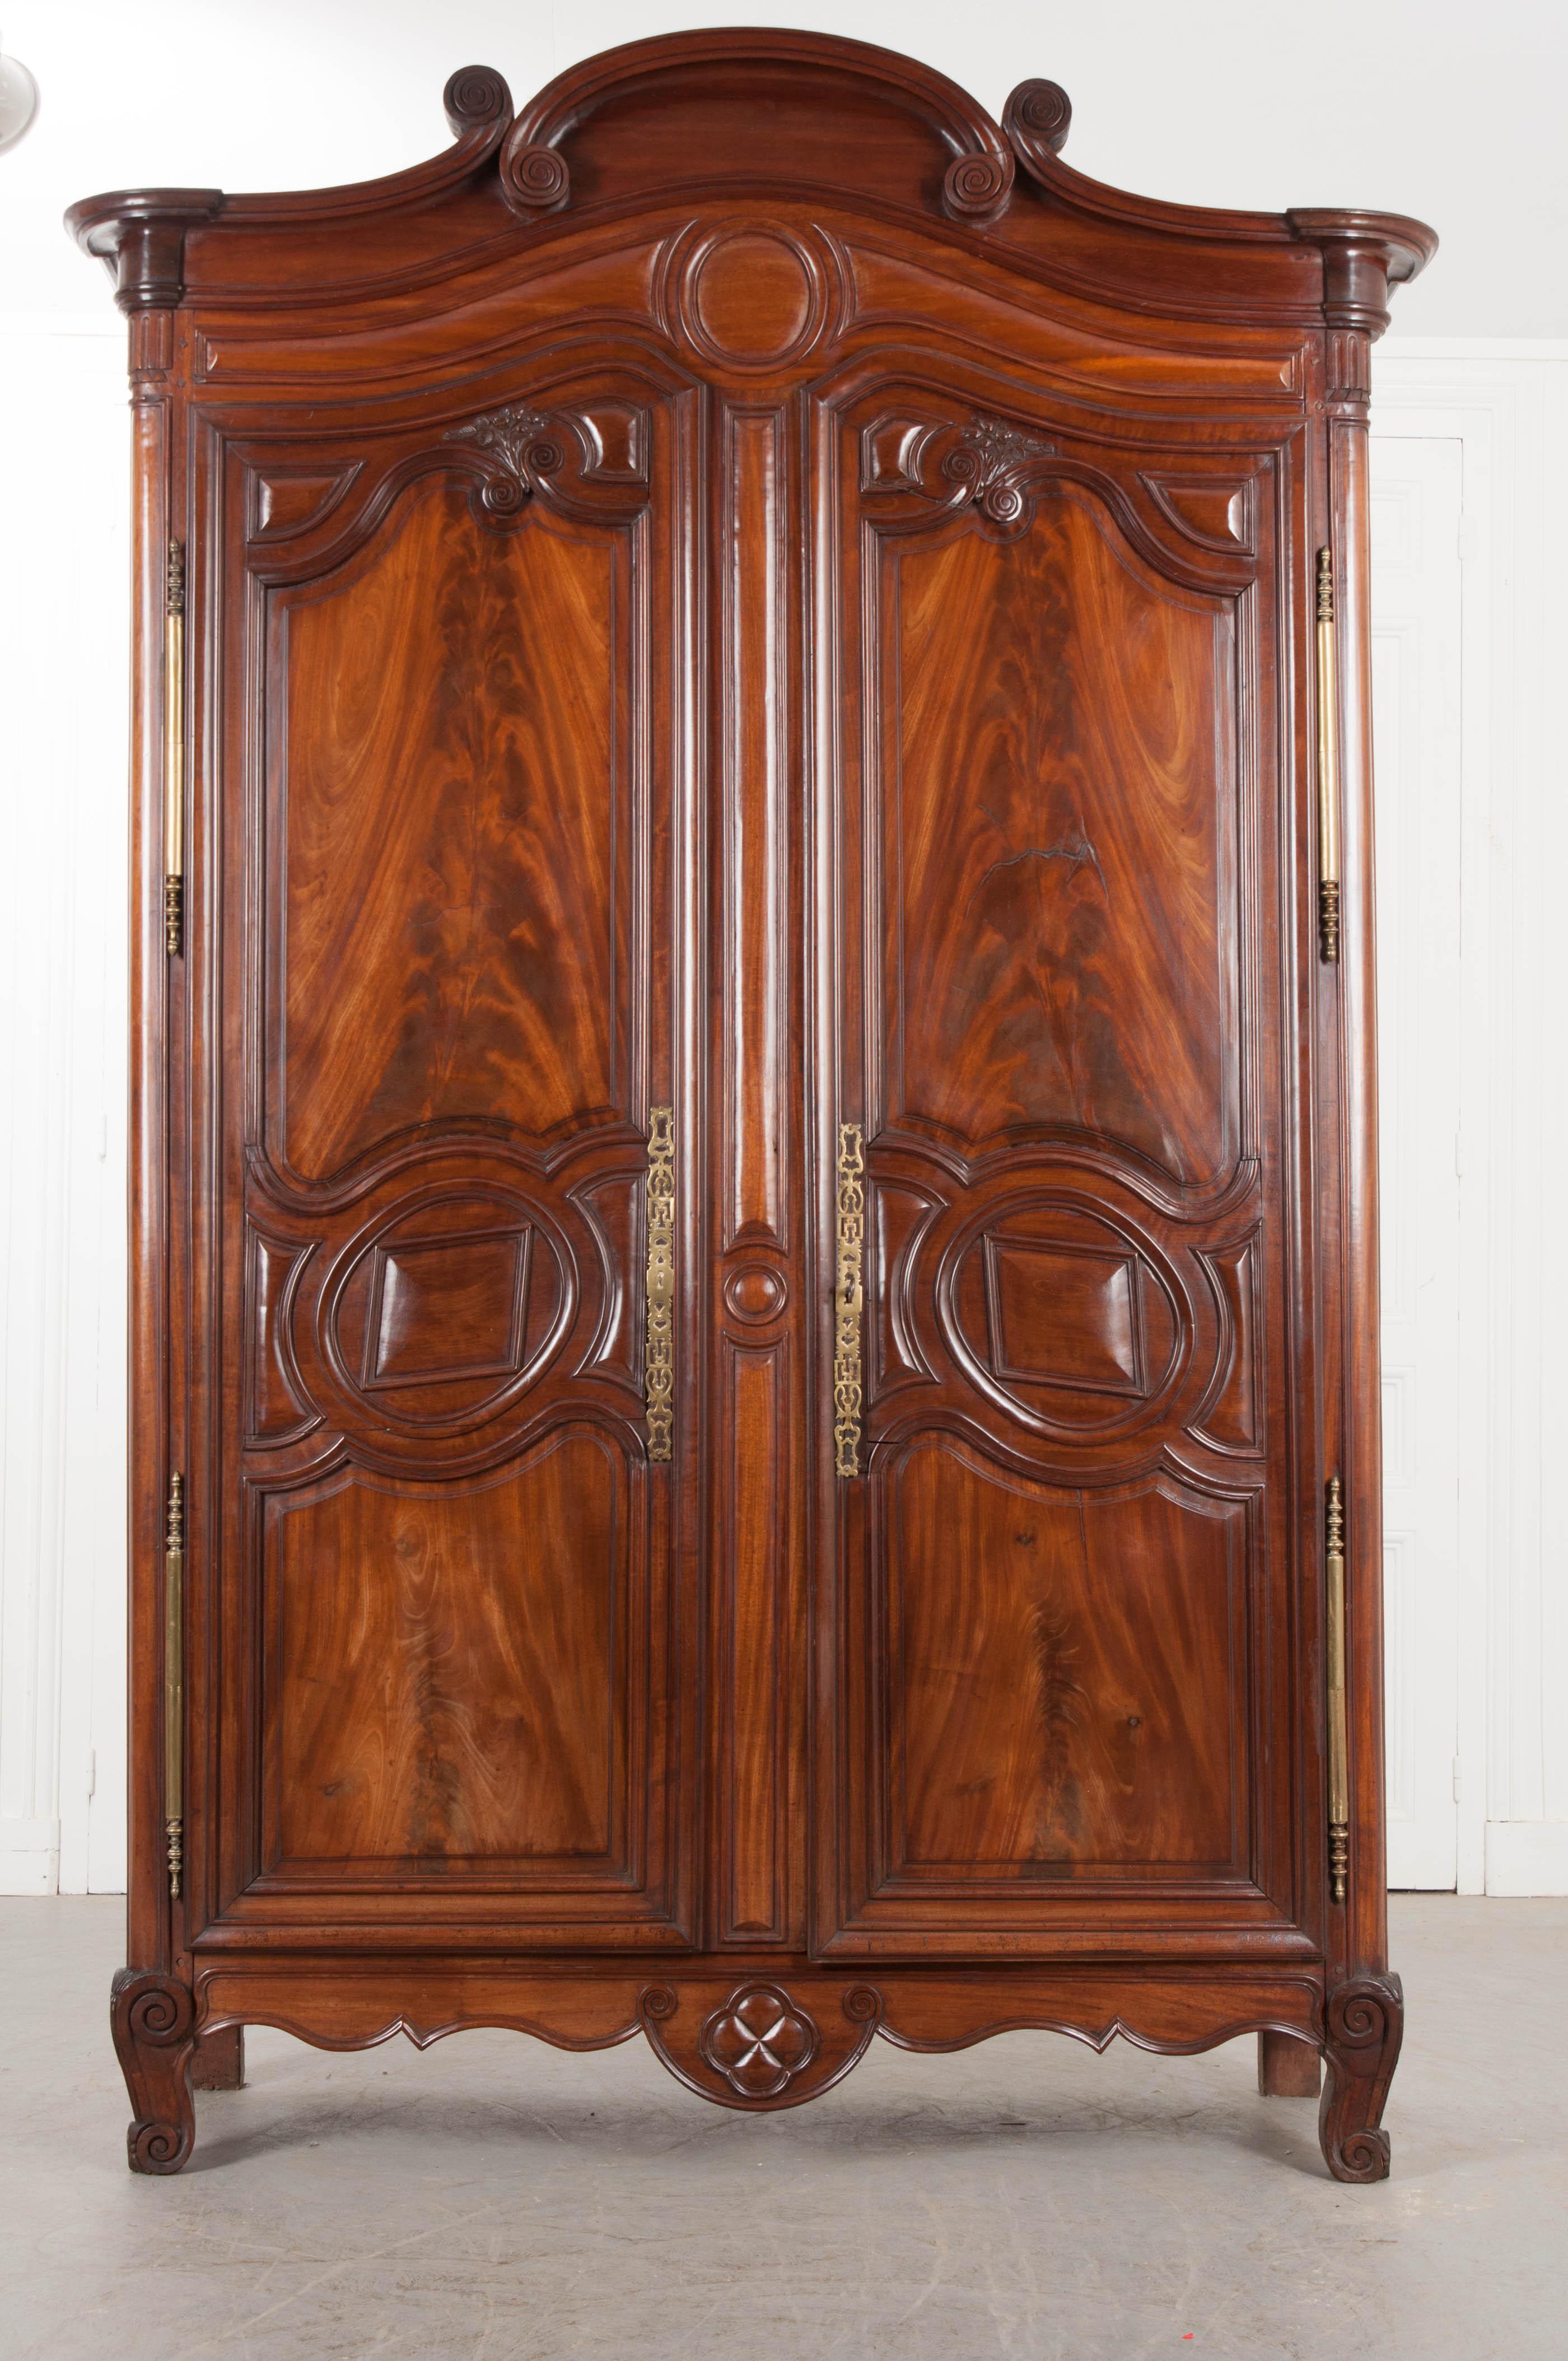 A gorgeous solid mahogany armoire, from the port of Normandy, France, circa 1780. This beautiful antique case piece was hand carved from solid mahogany and is styled with intricately carved scrolled and geometric details. The top is shaped and